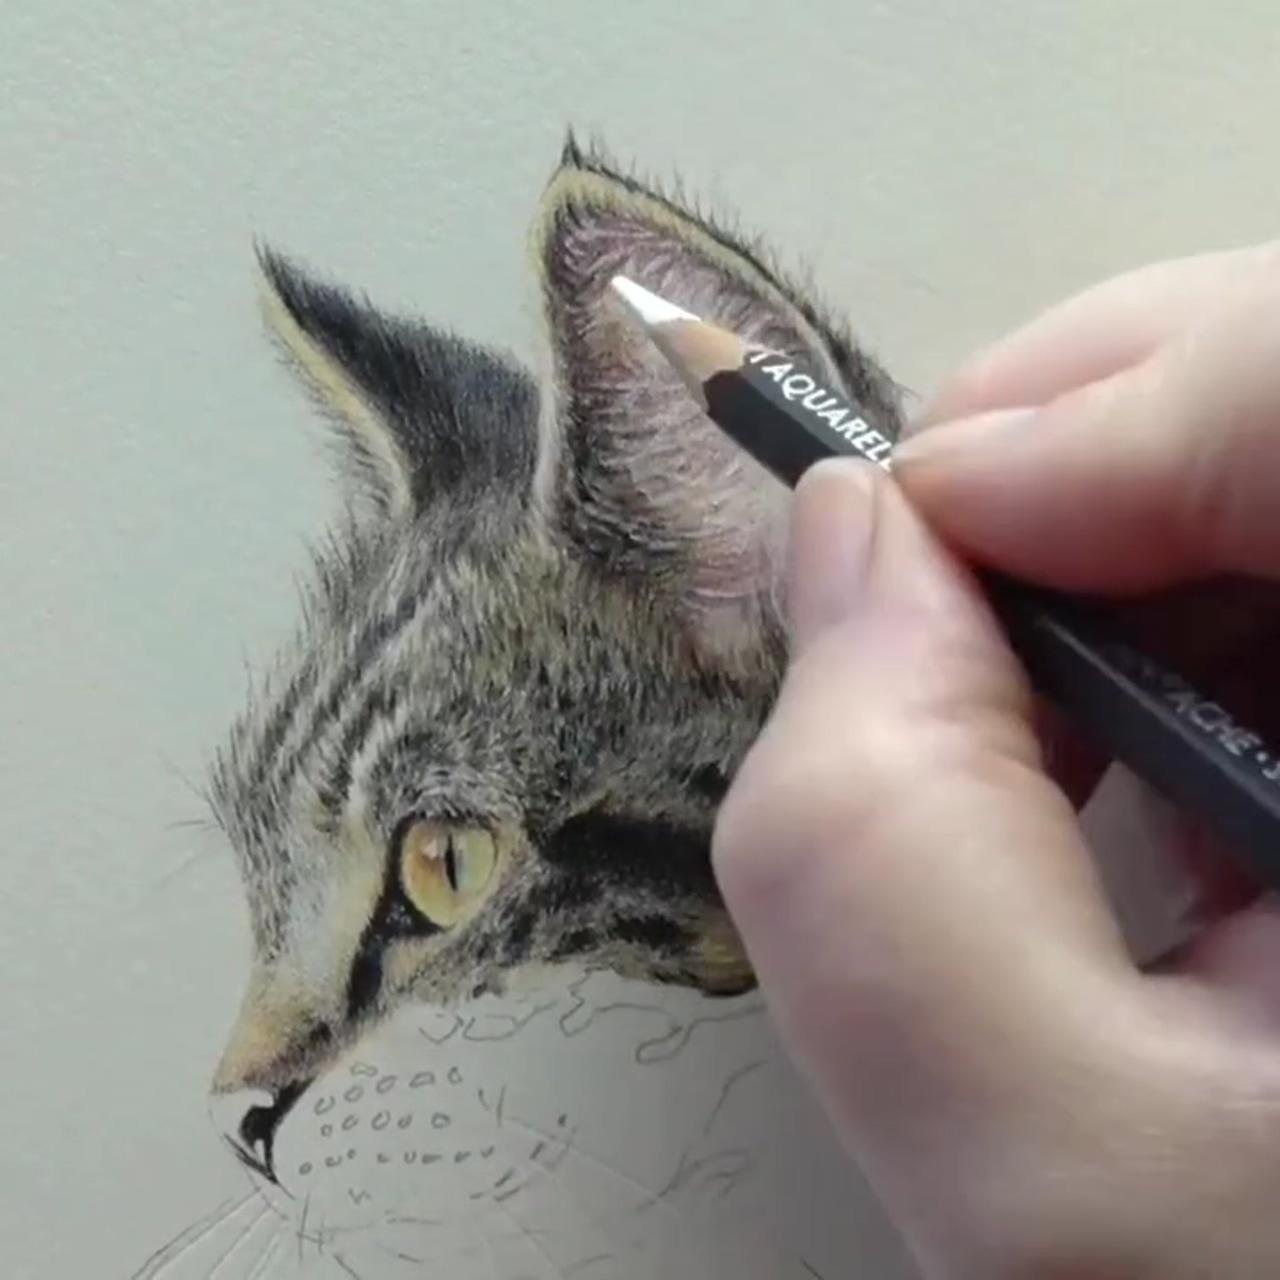 How to transfer line art to your surface, artist tips; learn to draw life like animals, drawing for beginners